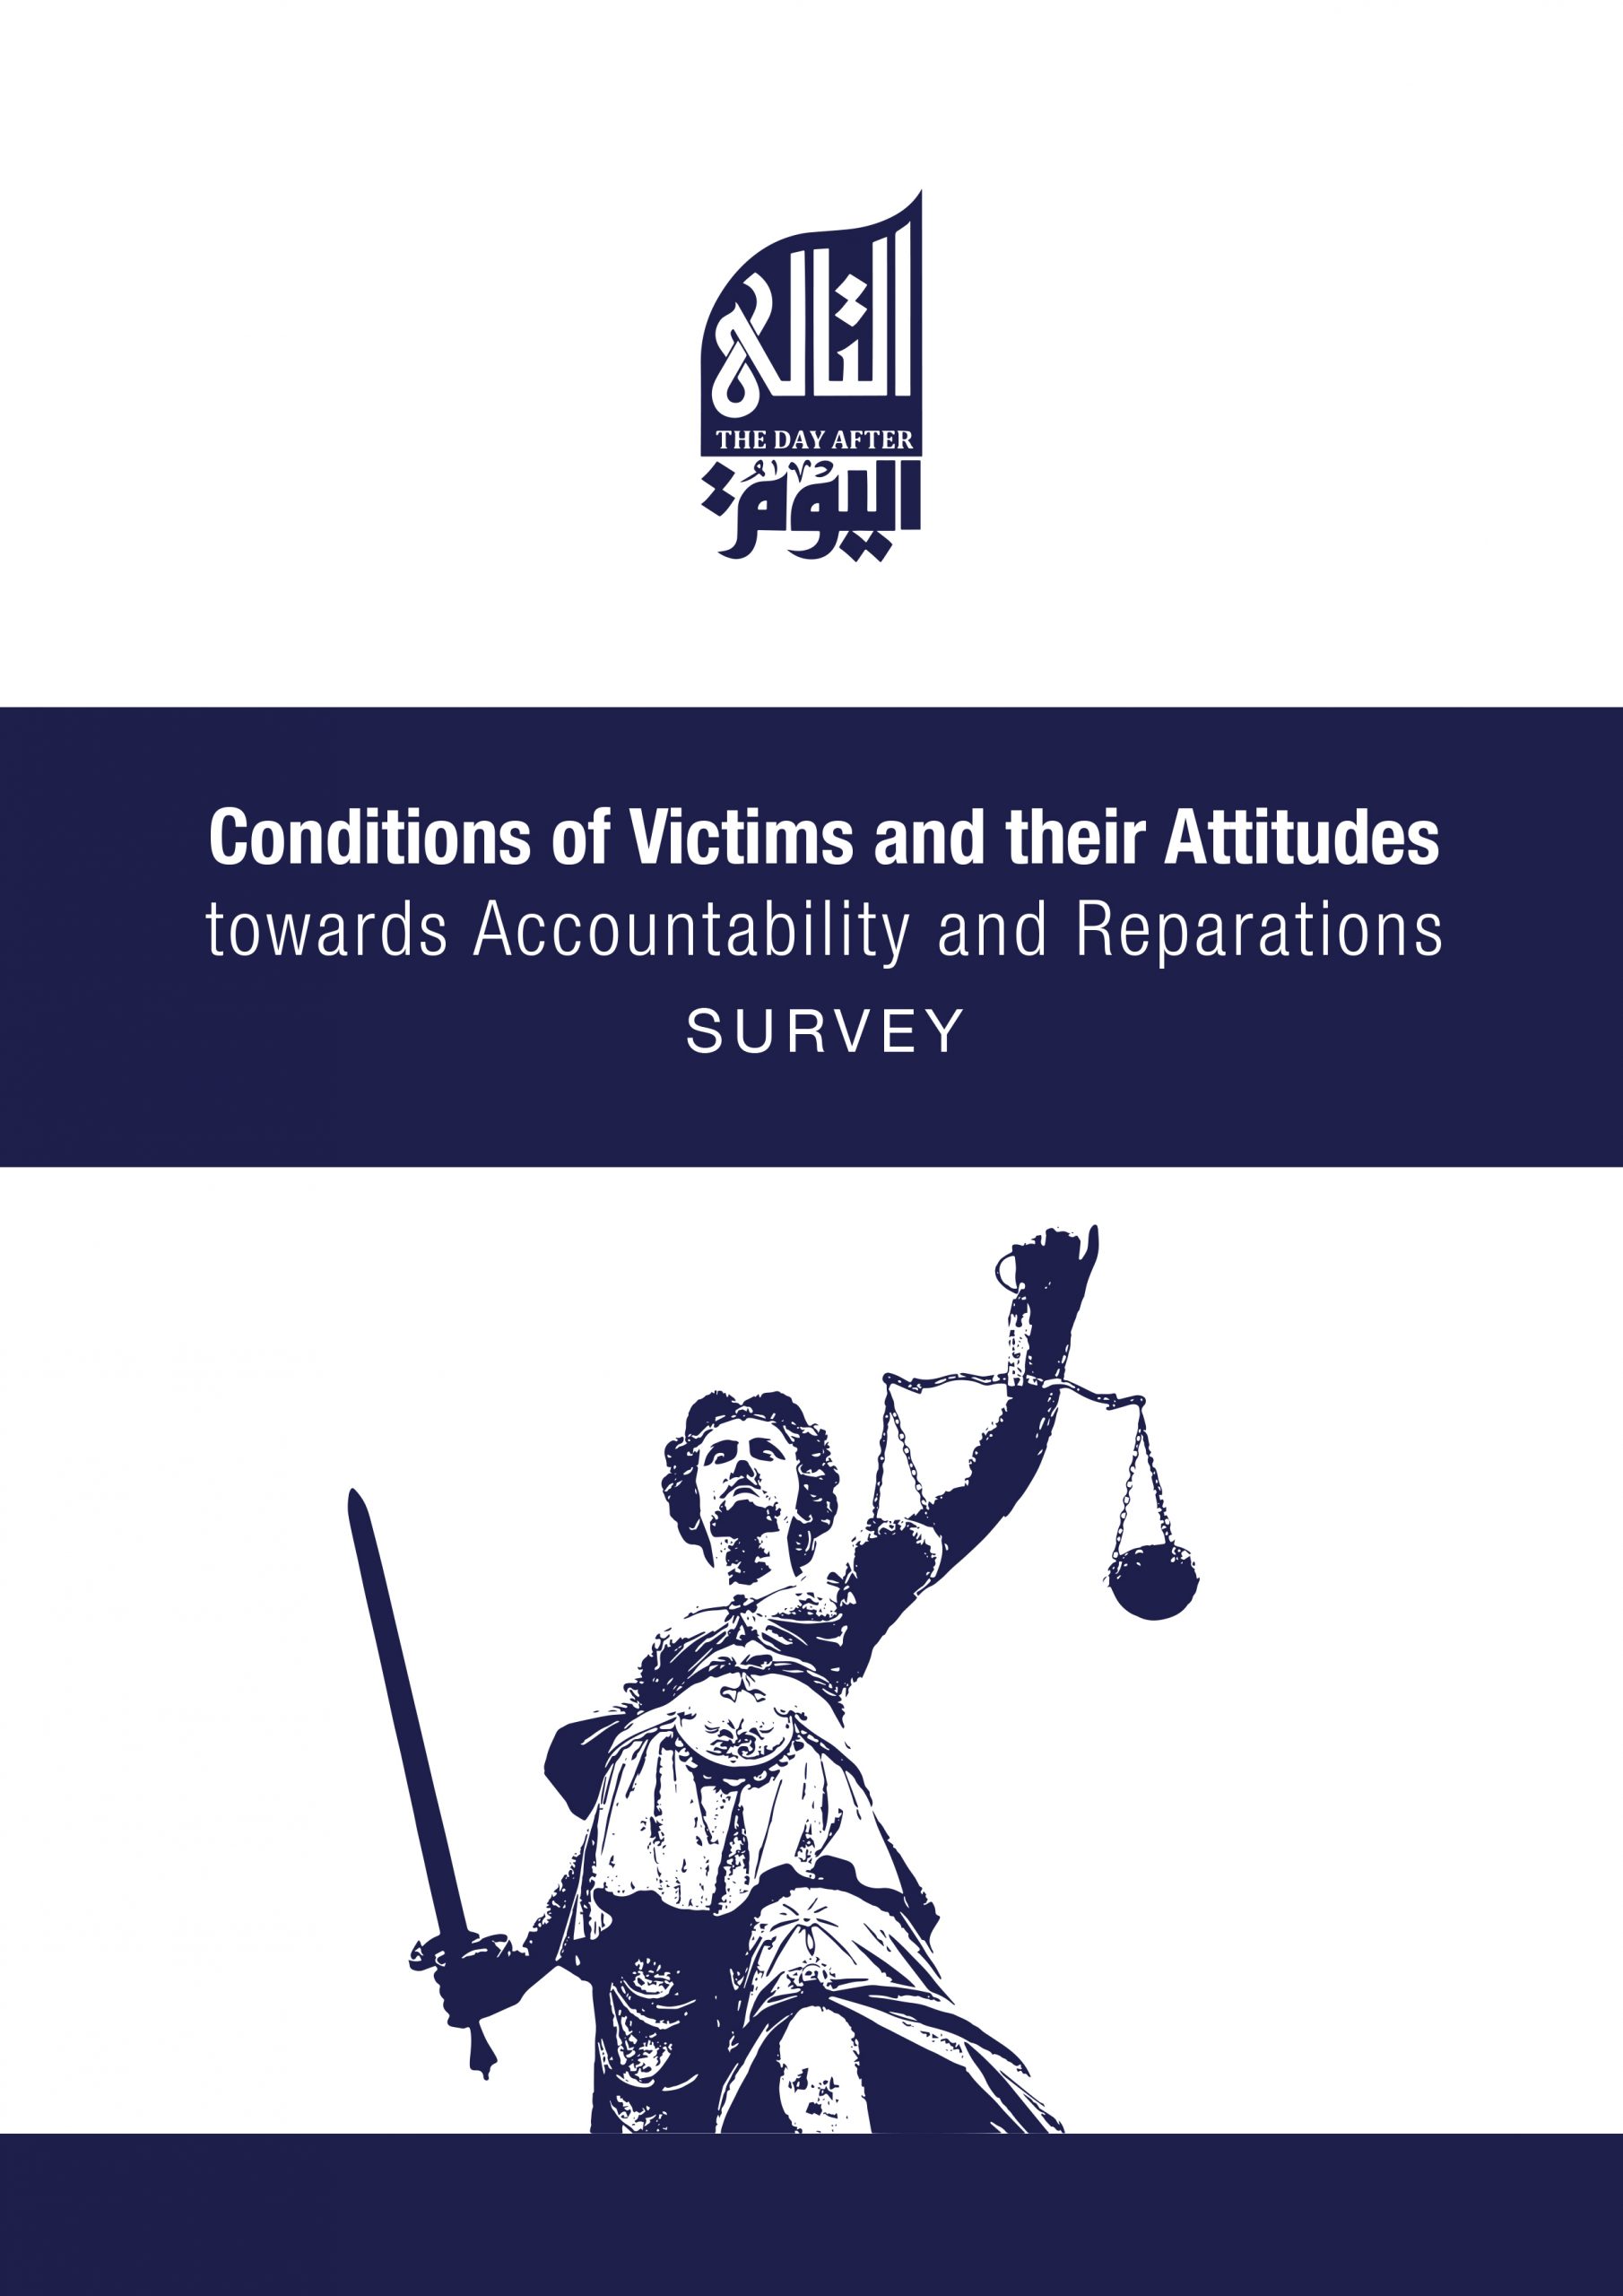 Conditions of Victims and their Attitudes towards Accountability and Reparations